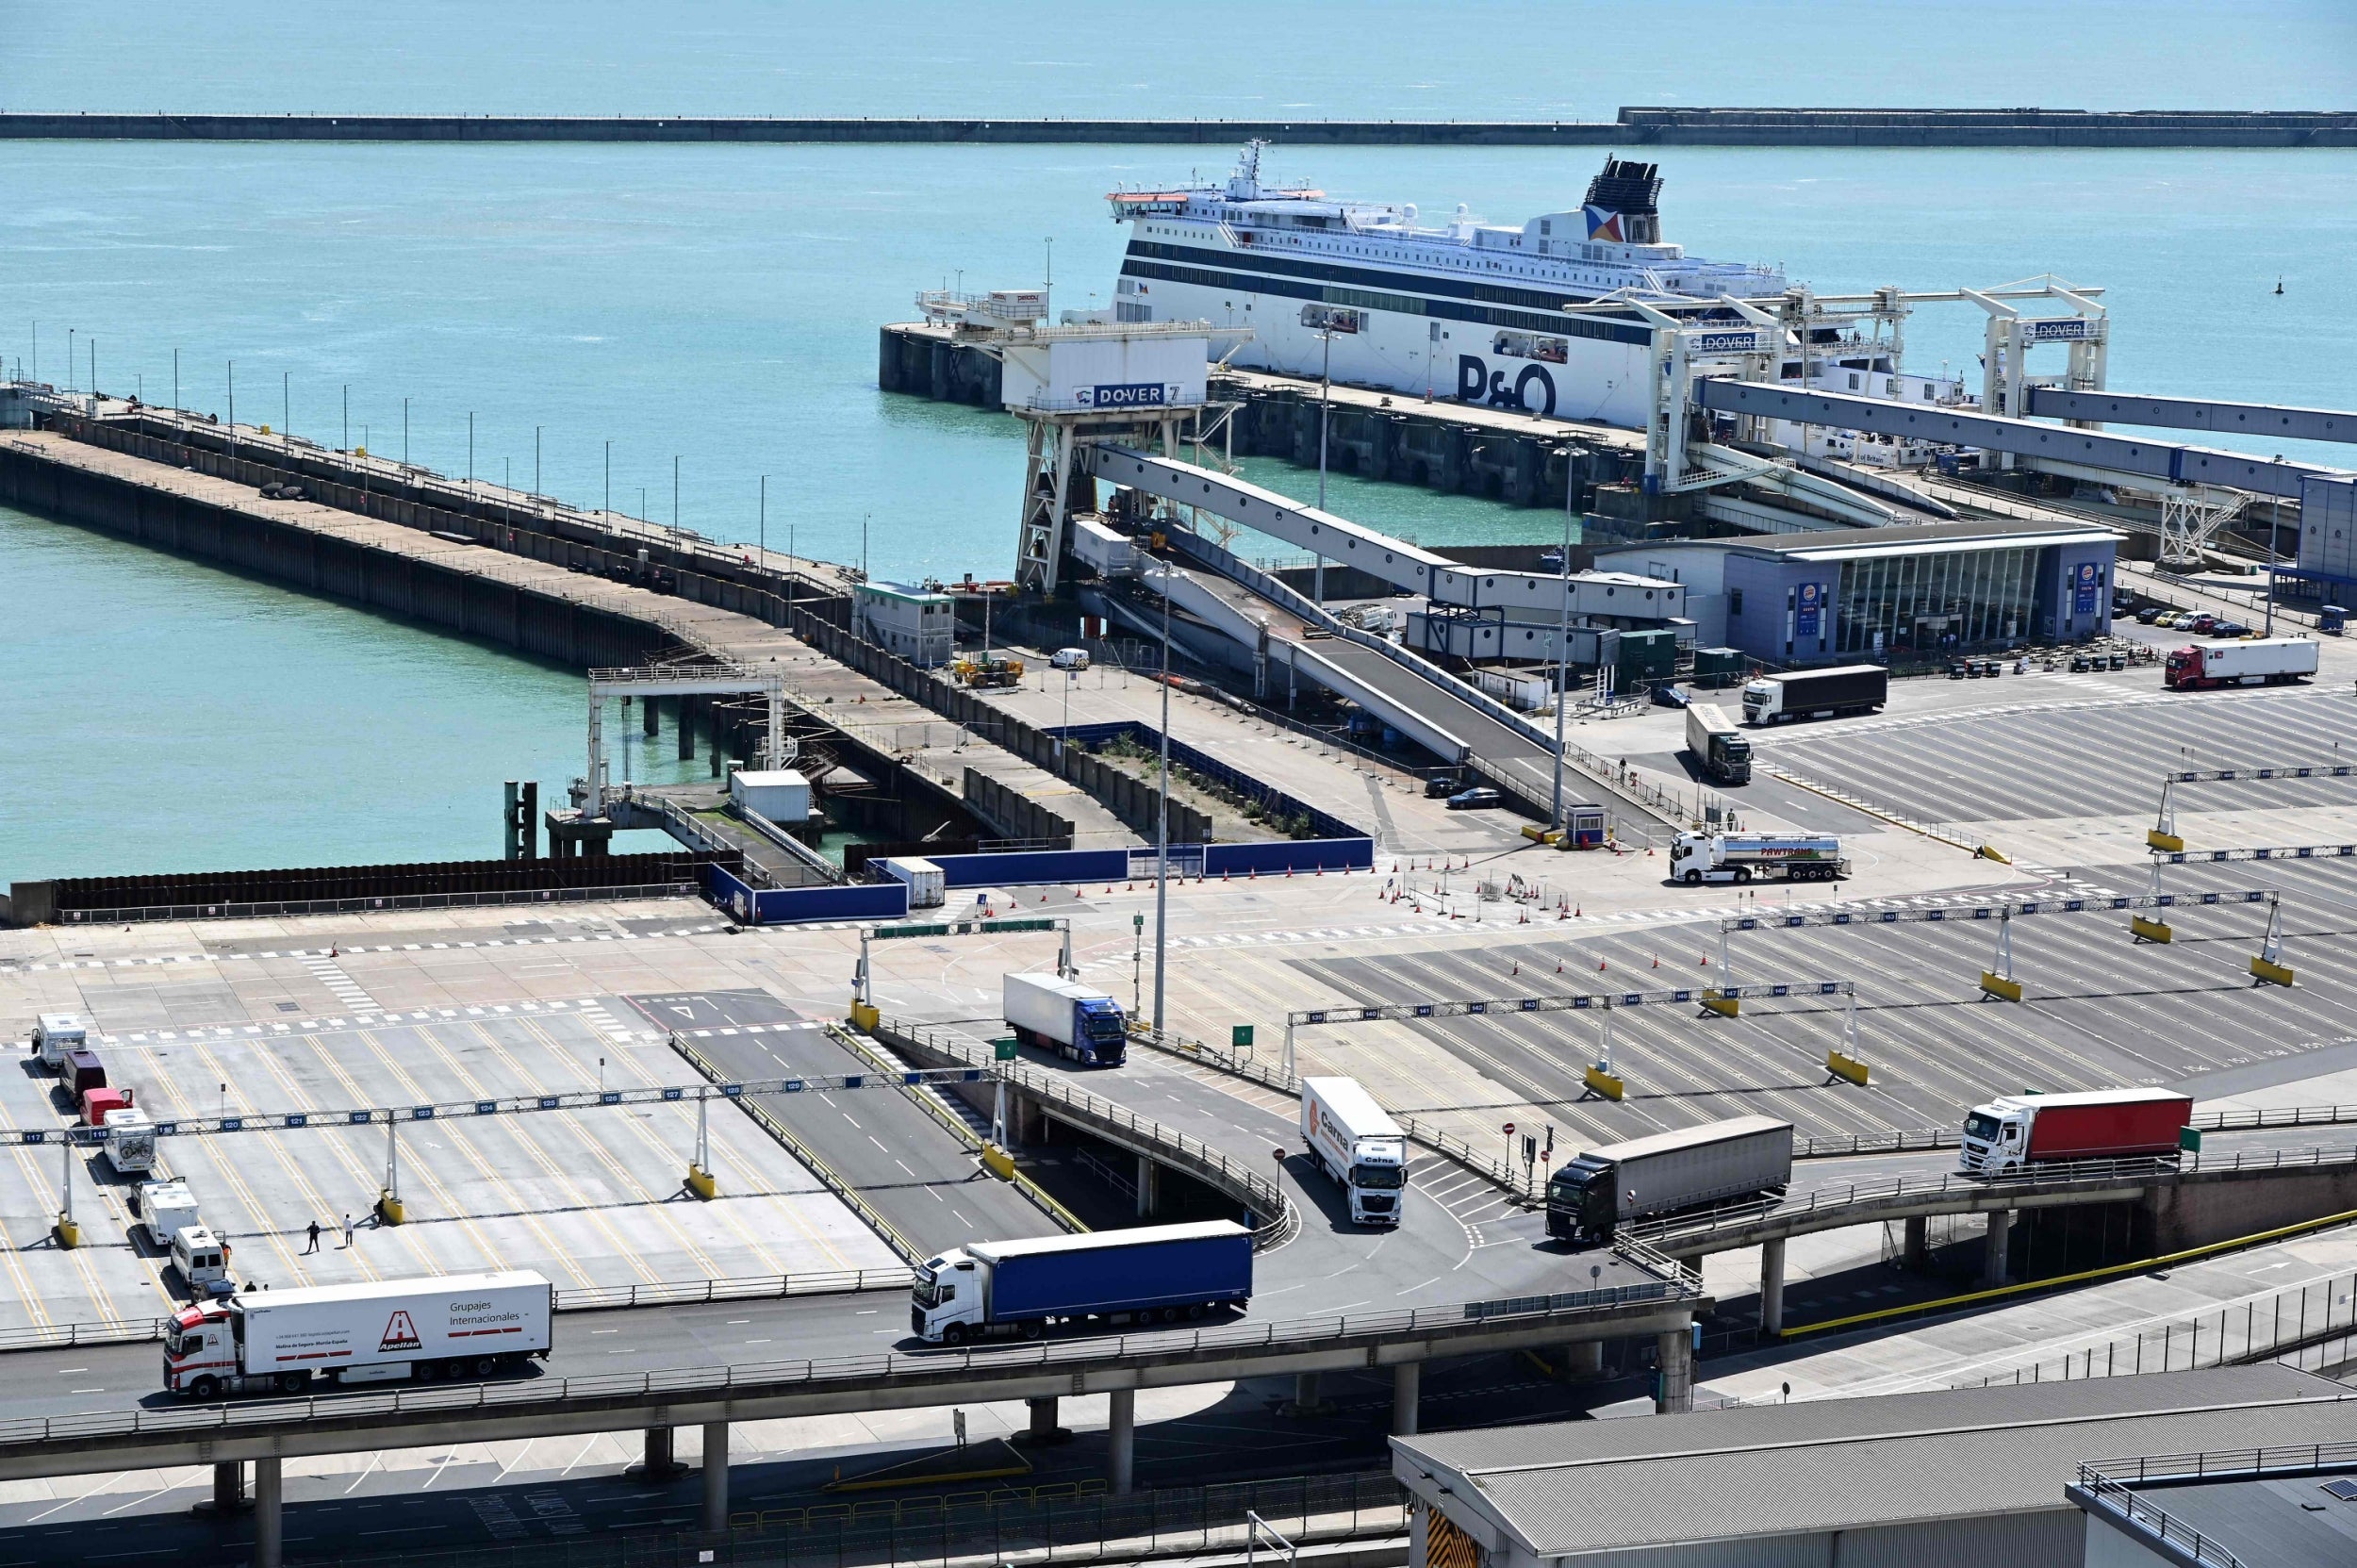 Ferries more popular than trains, planes or buses, according to Independent travel poll